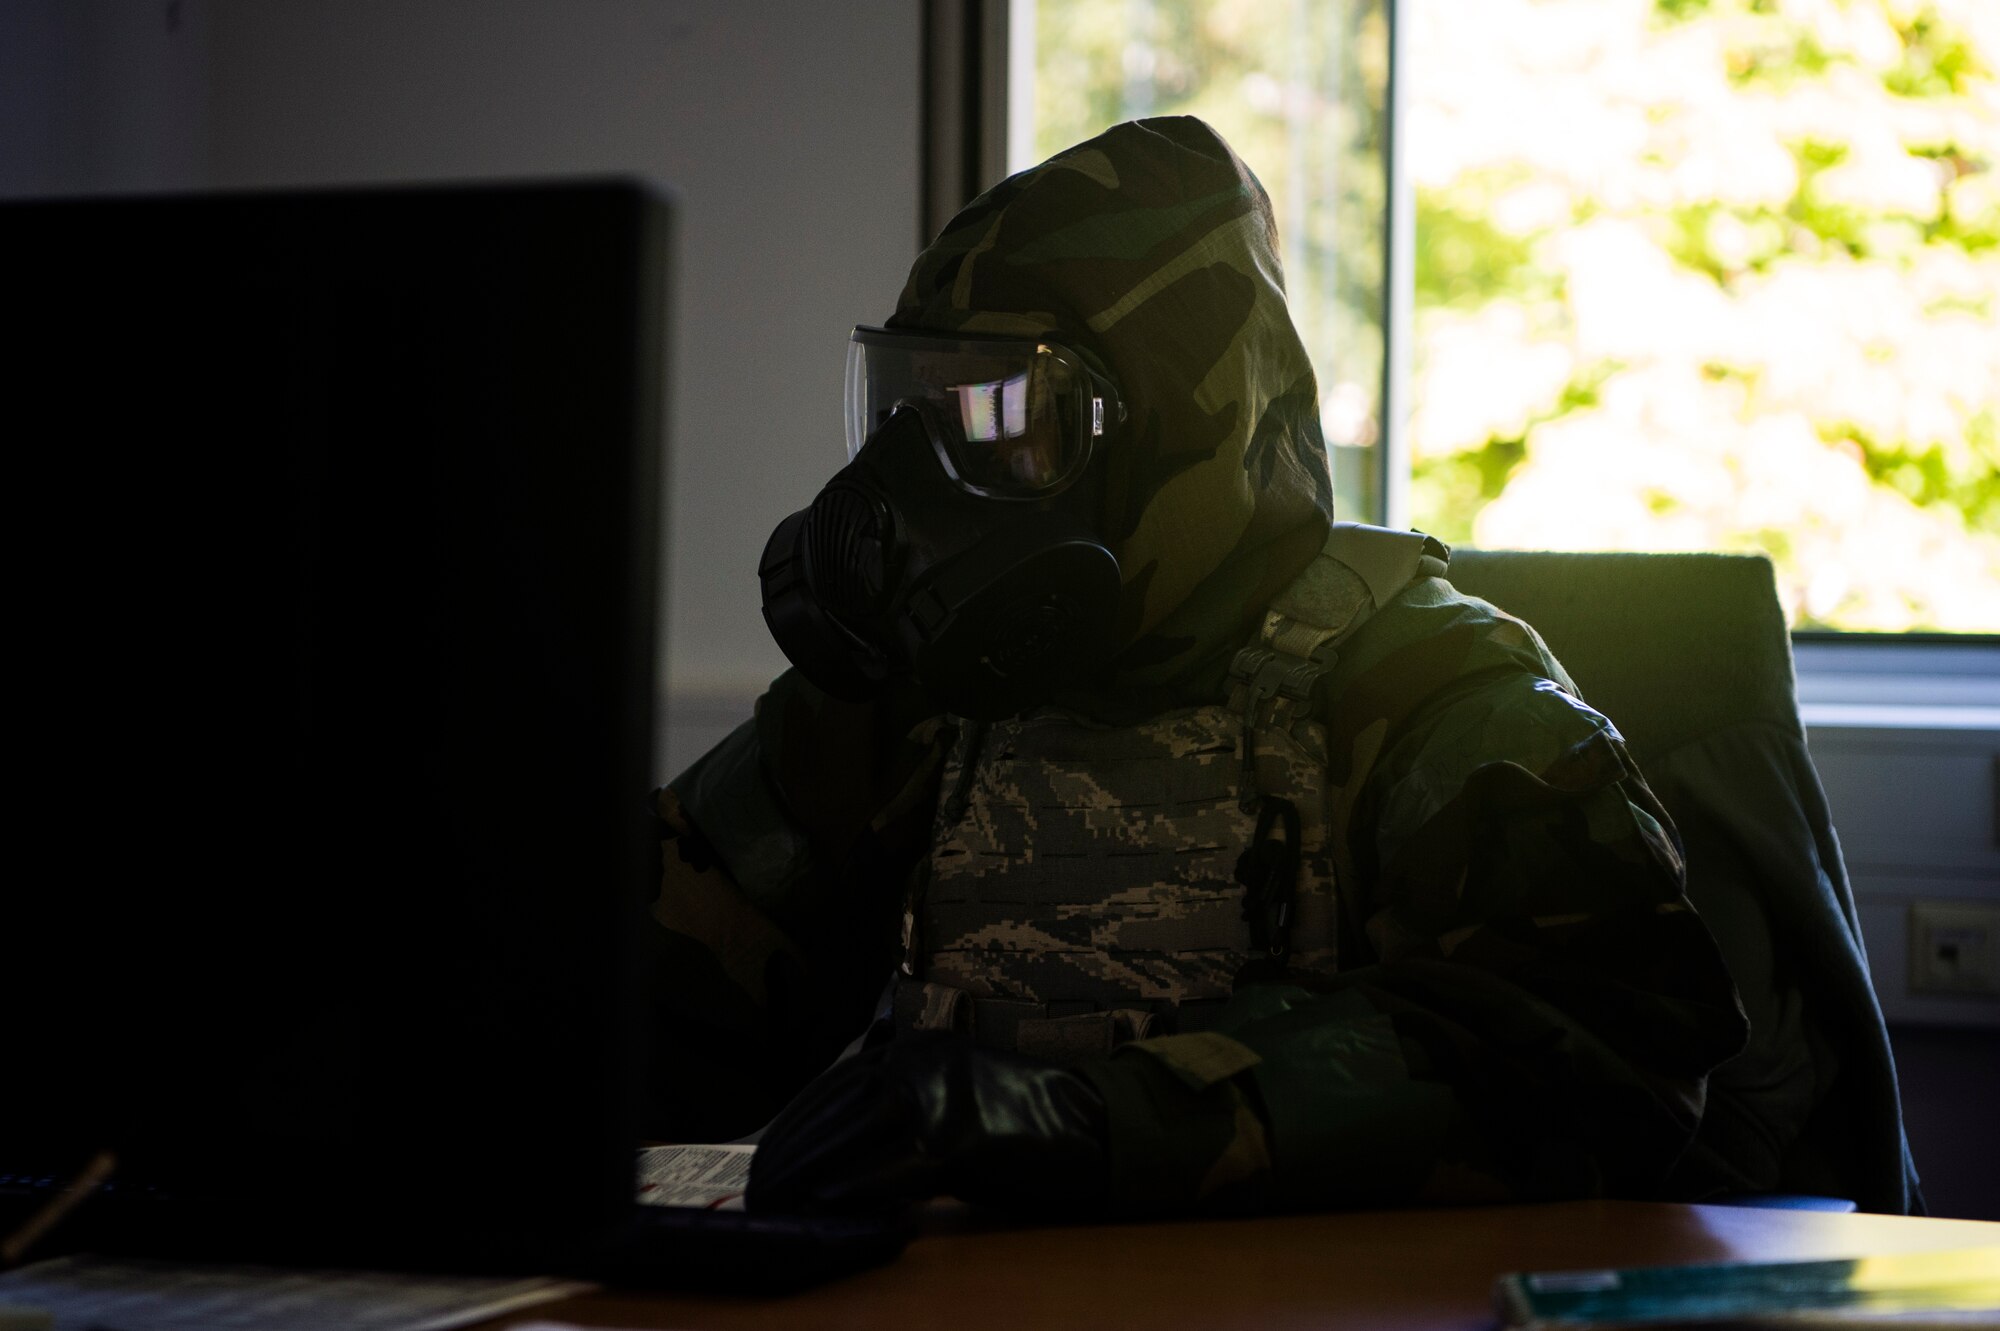 U.S. Air Force Master Sgt. Torrie Stack, 52nd Mission Support Group Logistics and Resources superintendent, performs his normal duties wearing mission-oriented protective posture gear at Spangdahlem Air Base, Germany, Sept. 12, 2018, during a base-wide readiness exercise. The event stressed the importance of being prepared for any possible chemical, biological, readiological, or nuclear threat. (U.S. Air Force photo by Airman 1st Class Valerie Seelye)